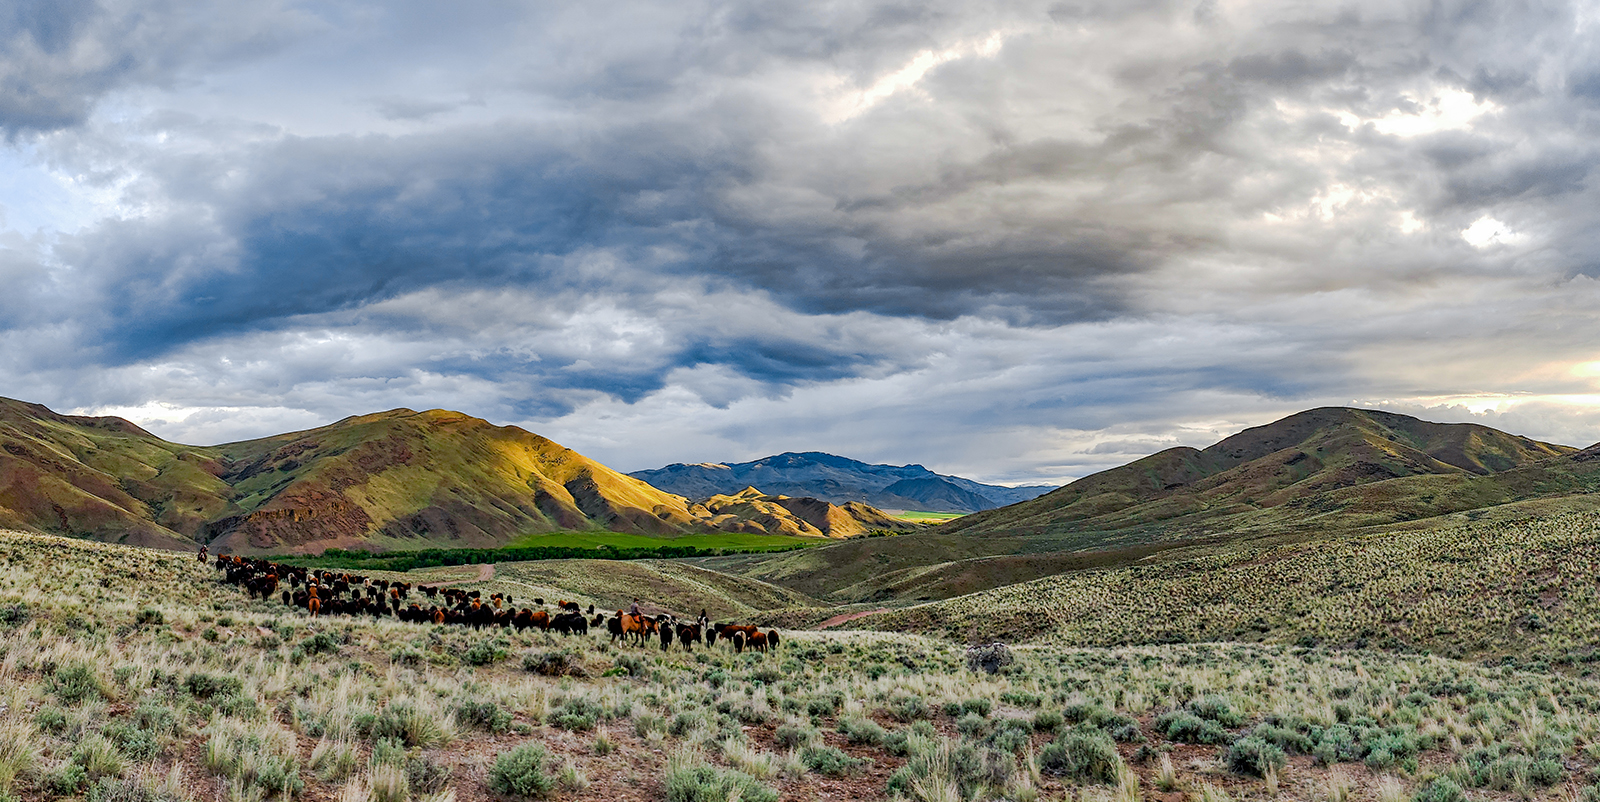 A trail of cattle in a stormy foothill landscape